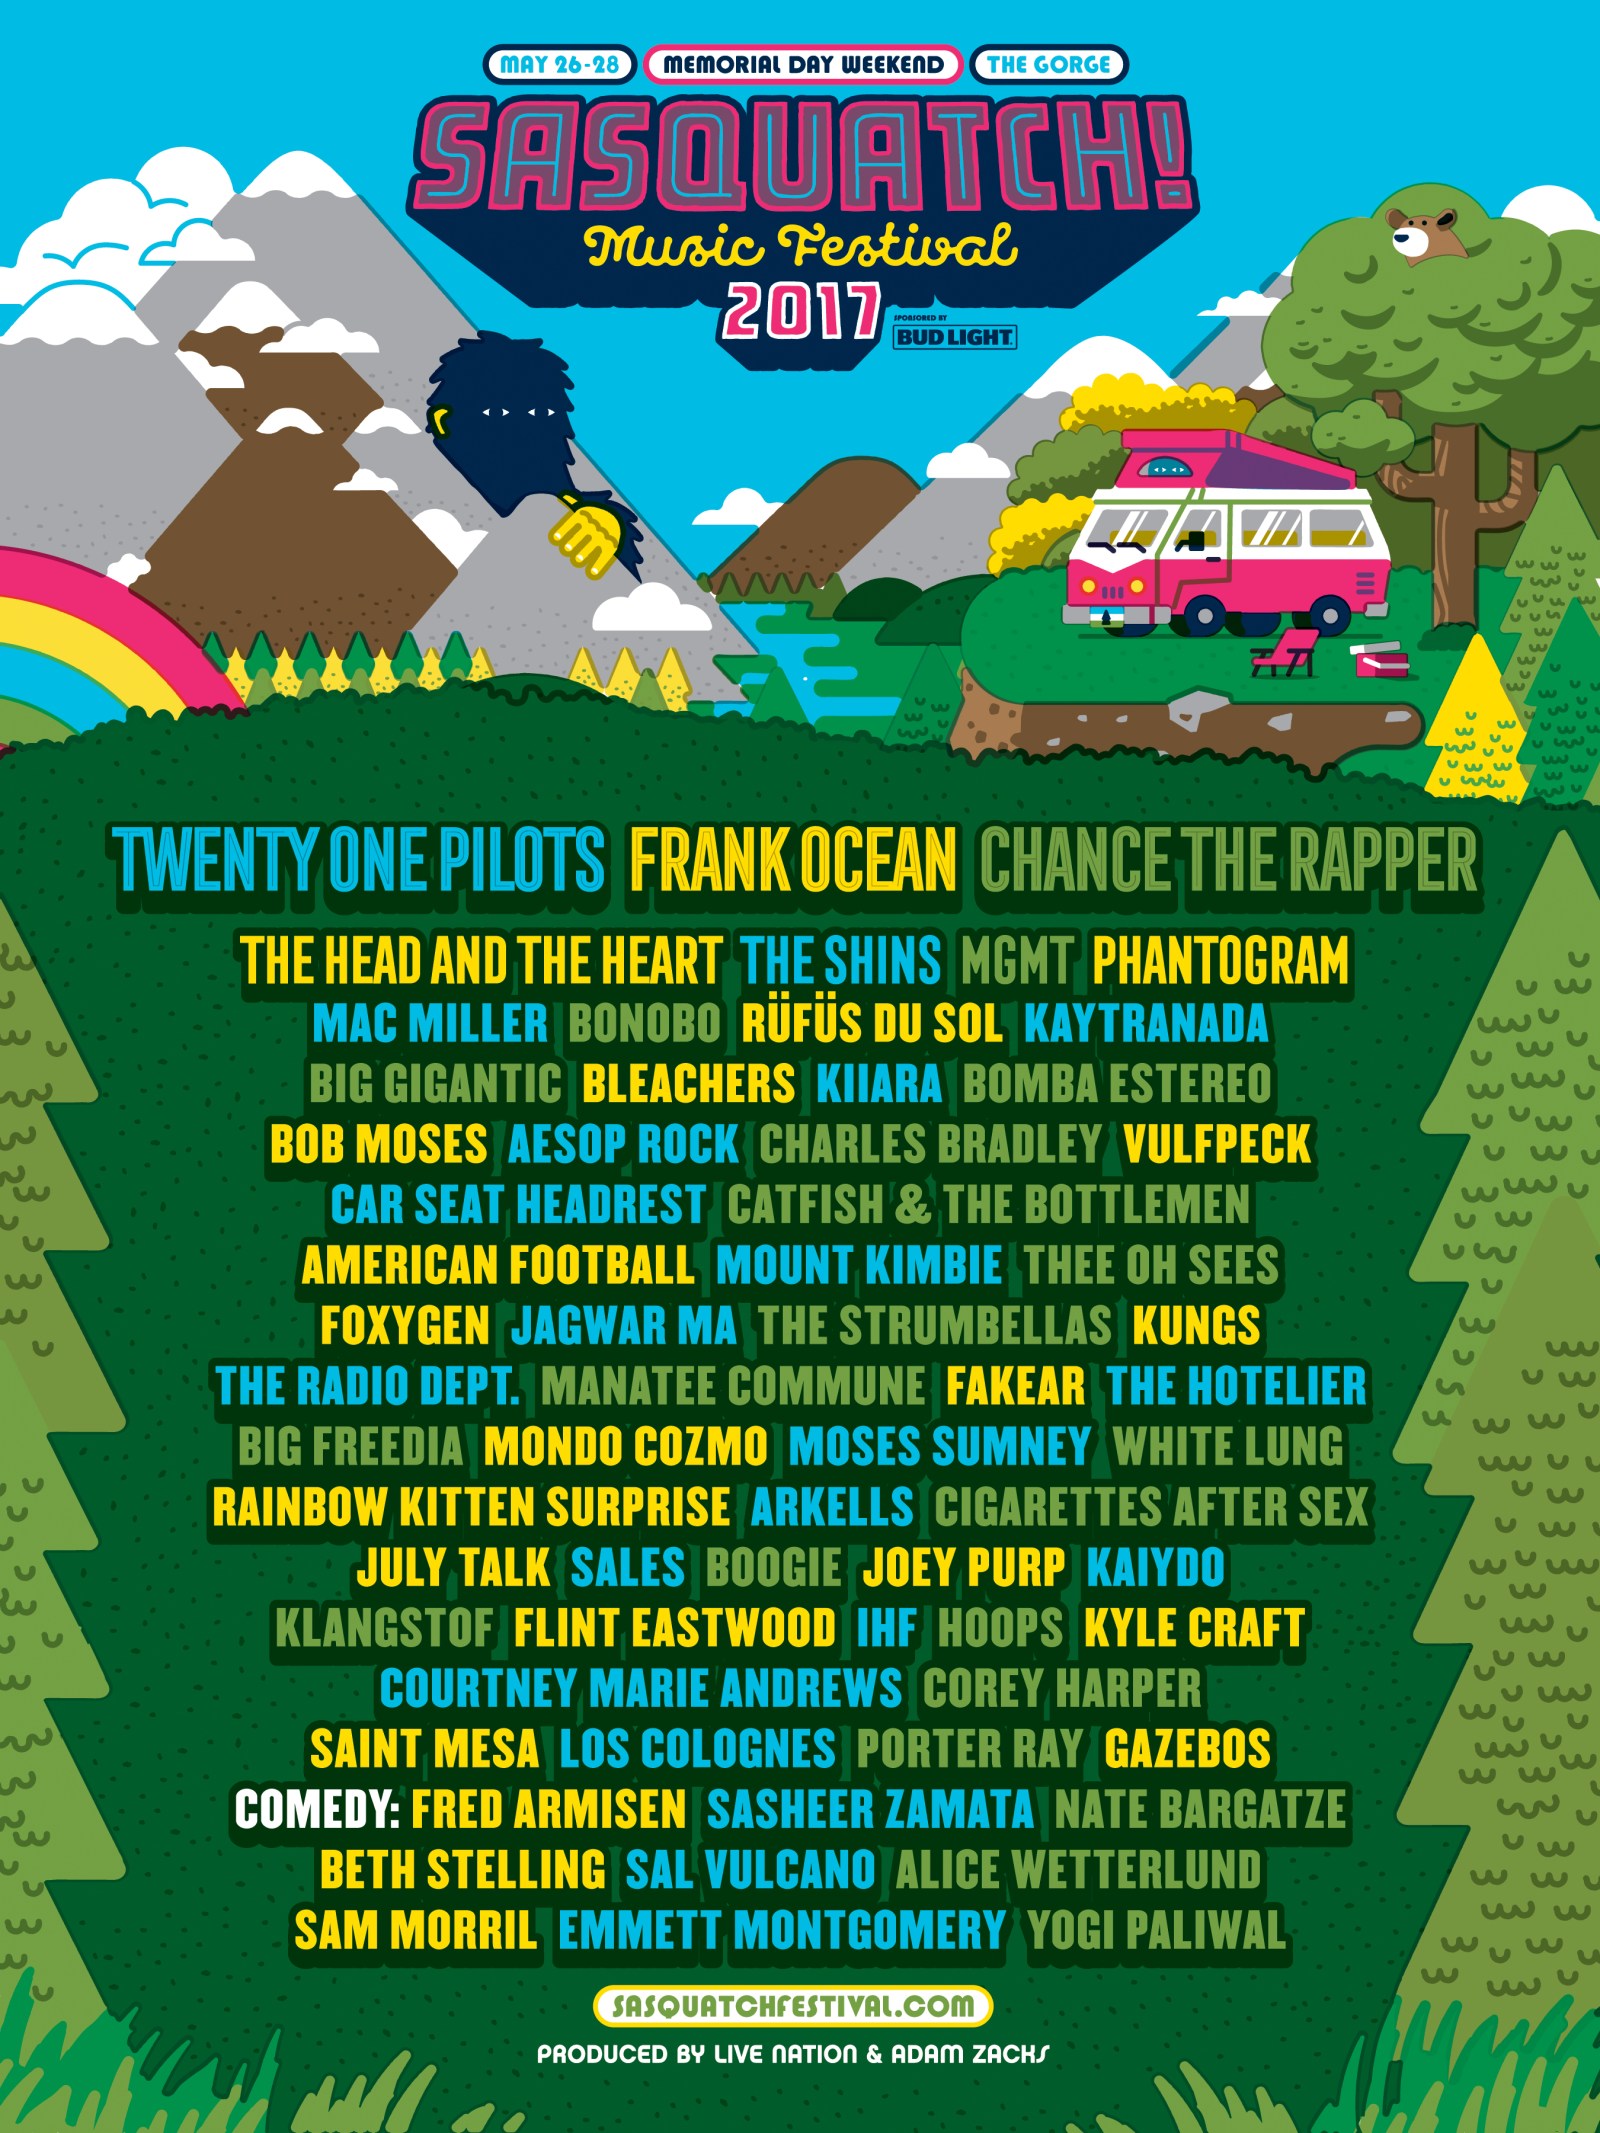 Frank Ocean And Chance The Rapper To Headline Sasquatch